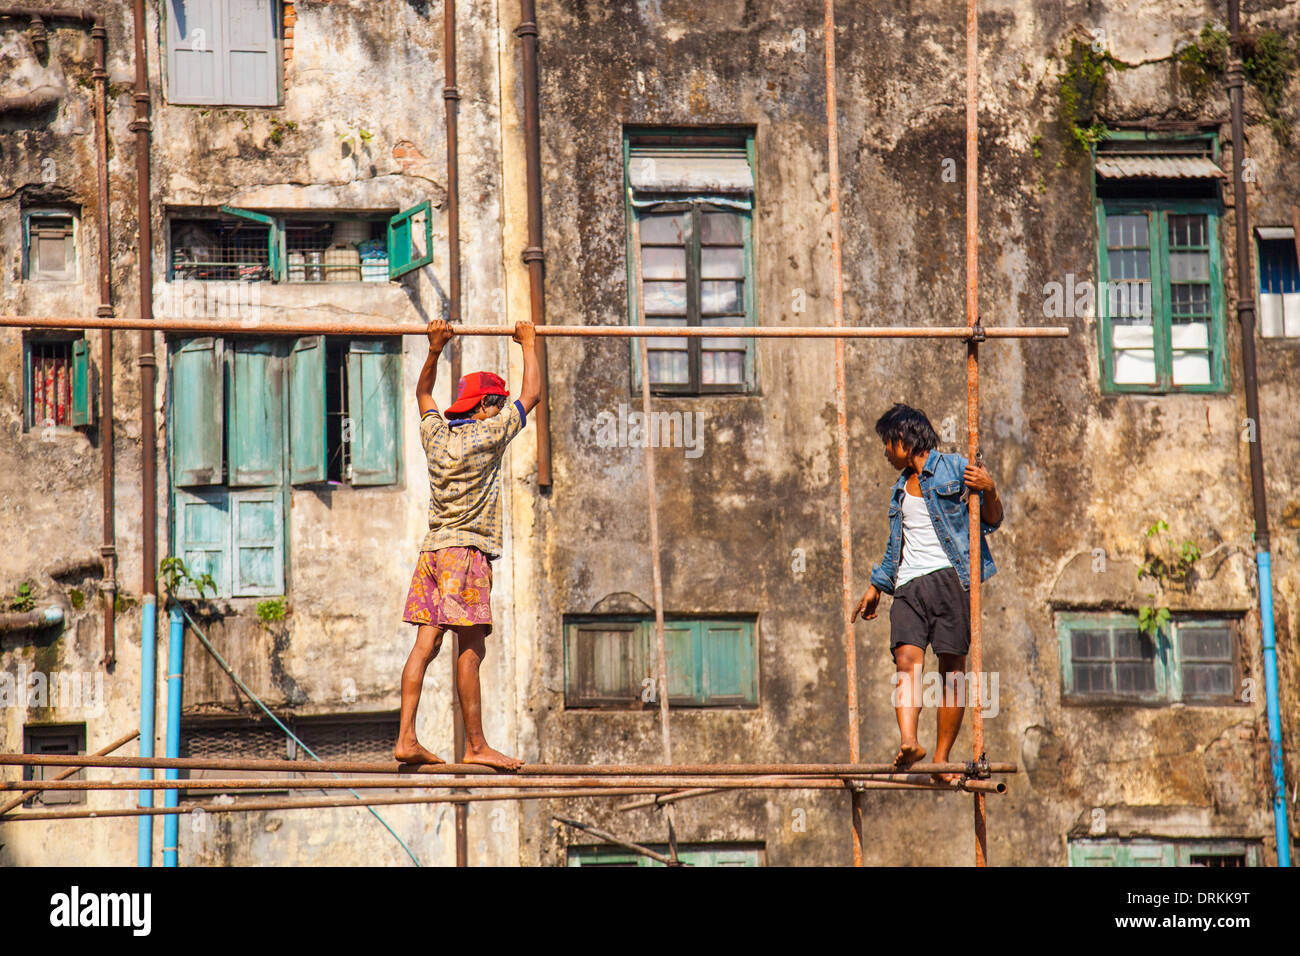 Workers on a construction site in Yangon, Myanmar Stock Photo